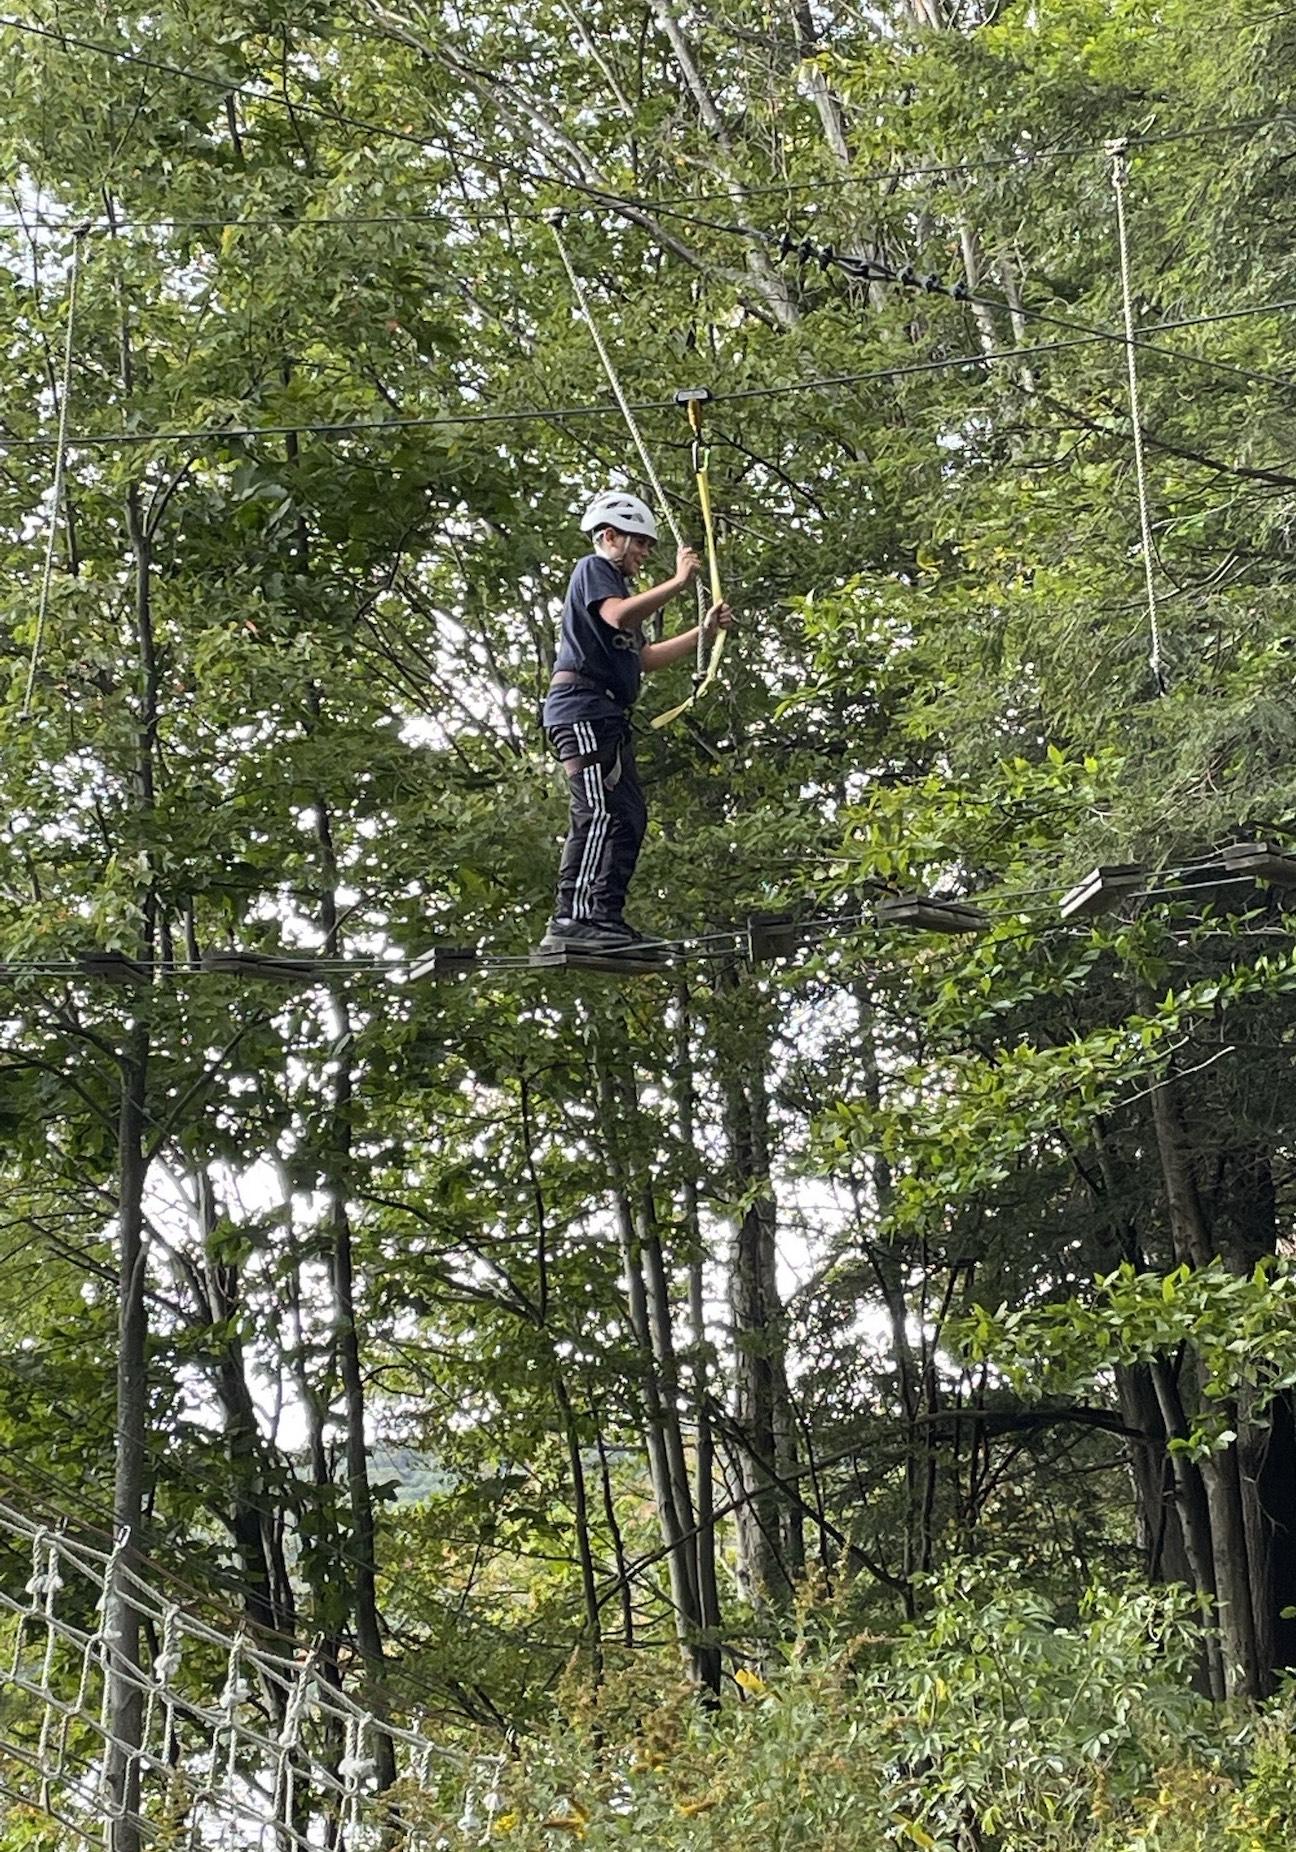 A student on the high ropes course